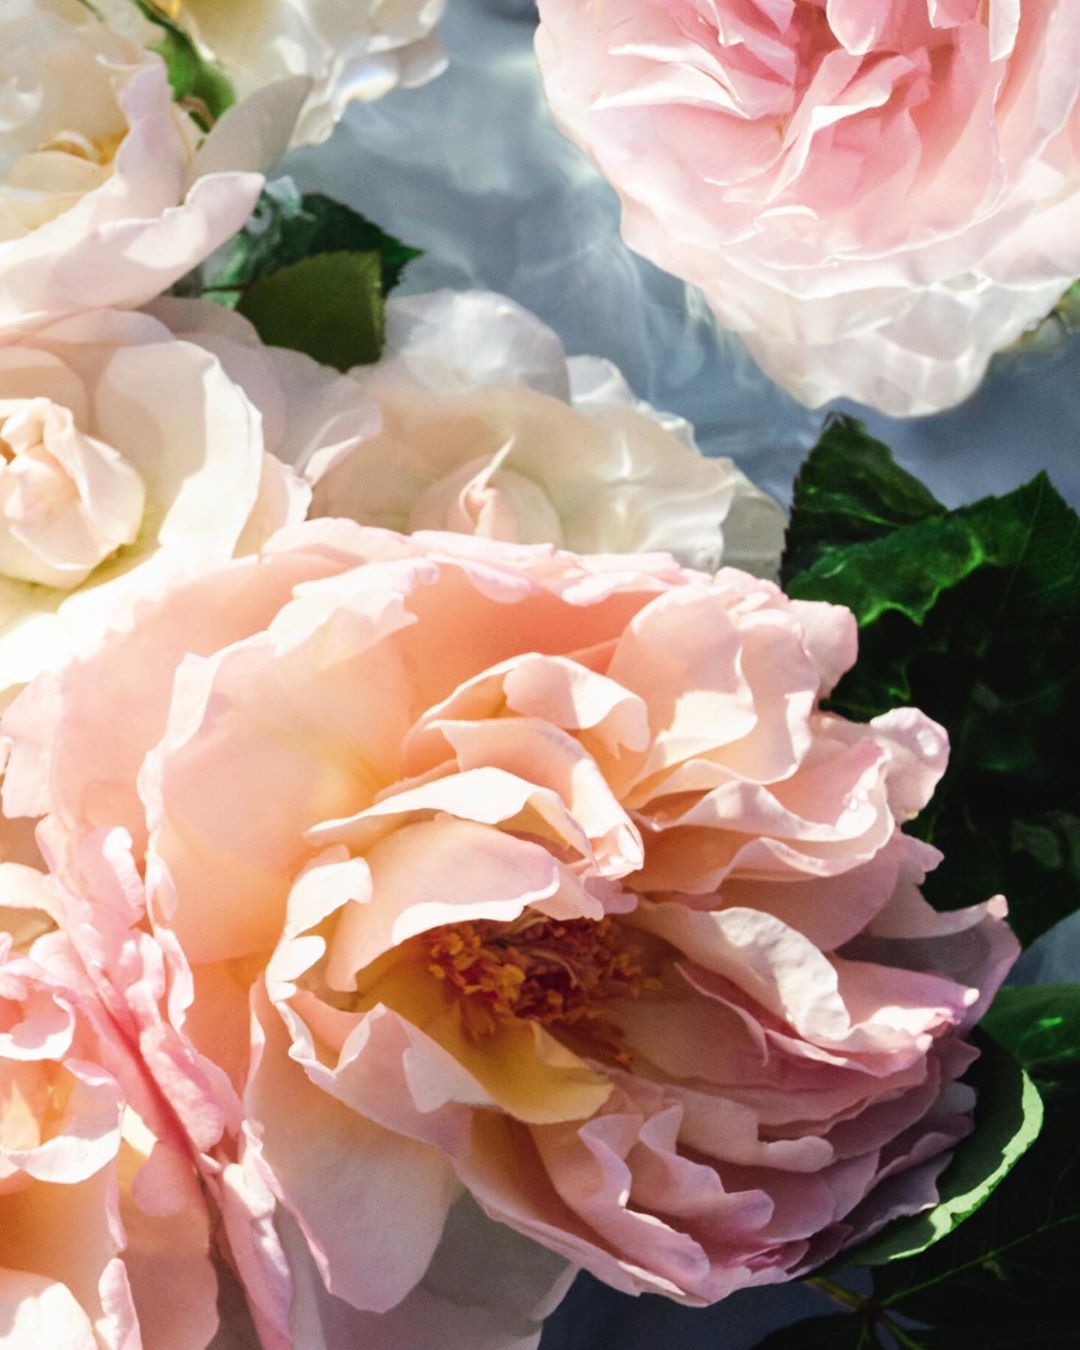 Guerlain - Sweet Bulgarian rose, blackcurrant and lychee blossom: Rosa Rossa is Aqua Allegoria's homage to the beautiful rose garden, with its timeless elegance and delicate beauty.

Aqua Allegoria: j...